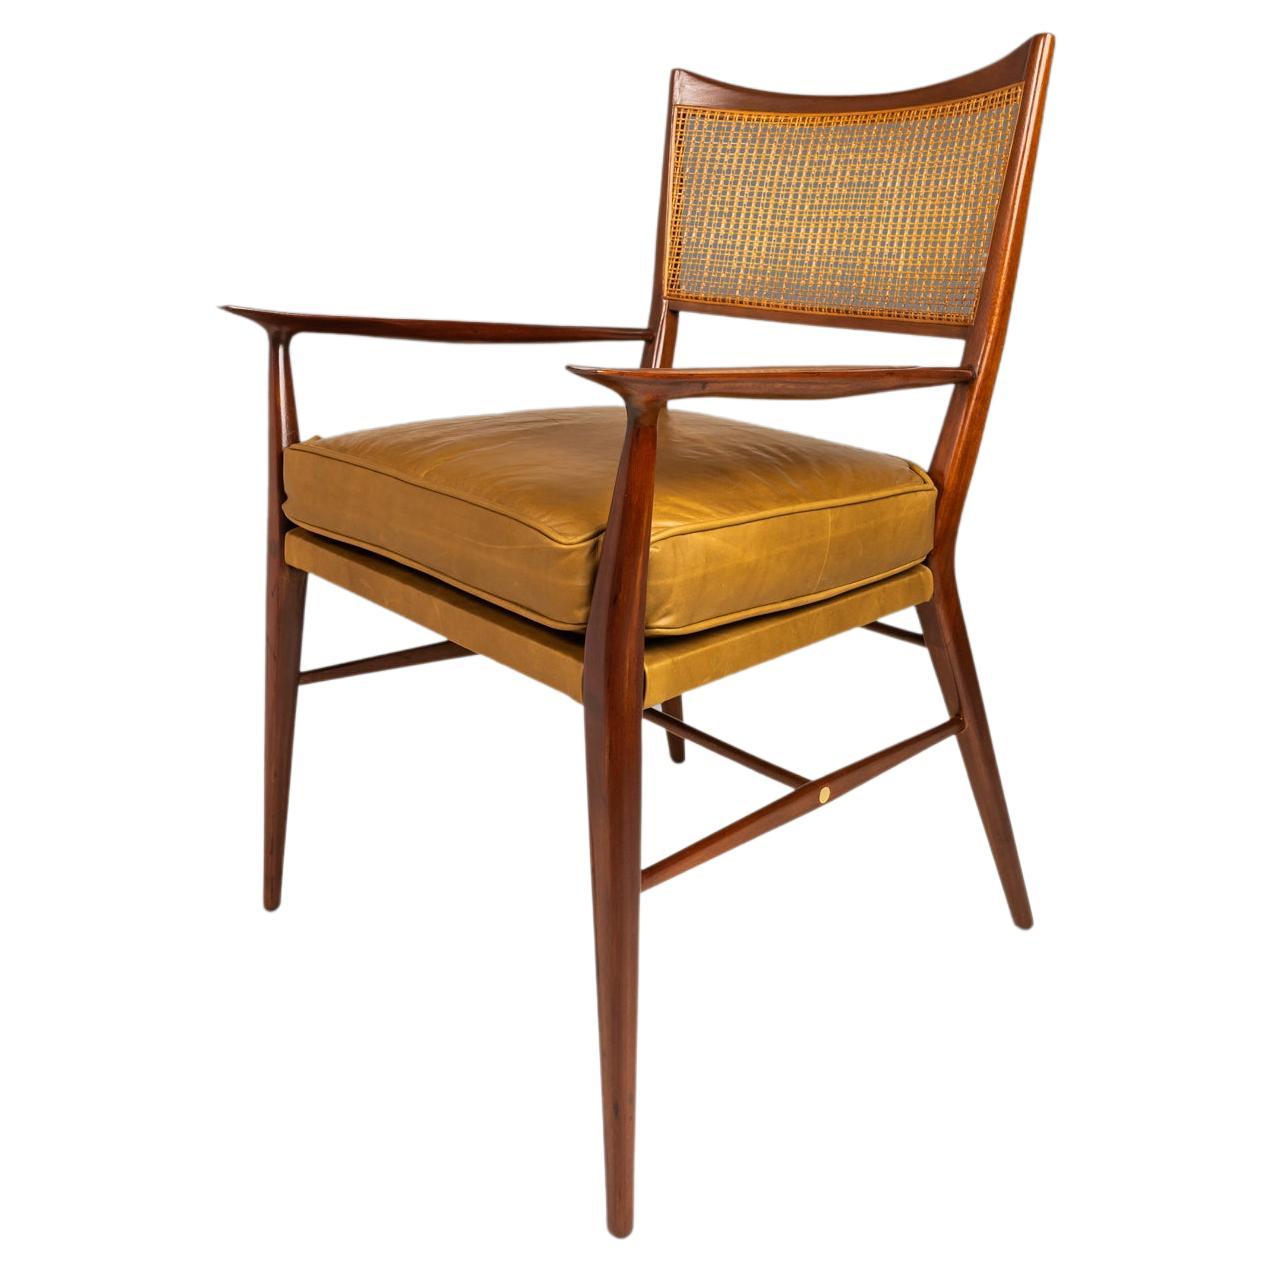 MCM Model 7001 Chair in Walnut by Paul McCobb for Directional, USA, c. 1950s For Sale